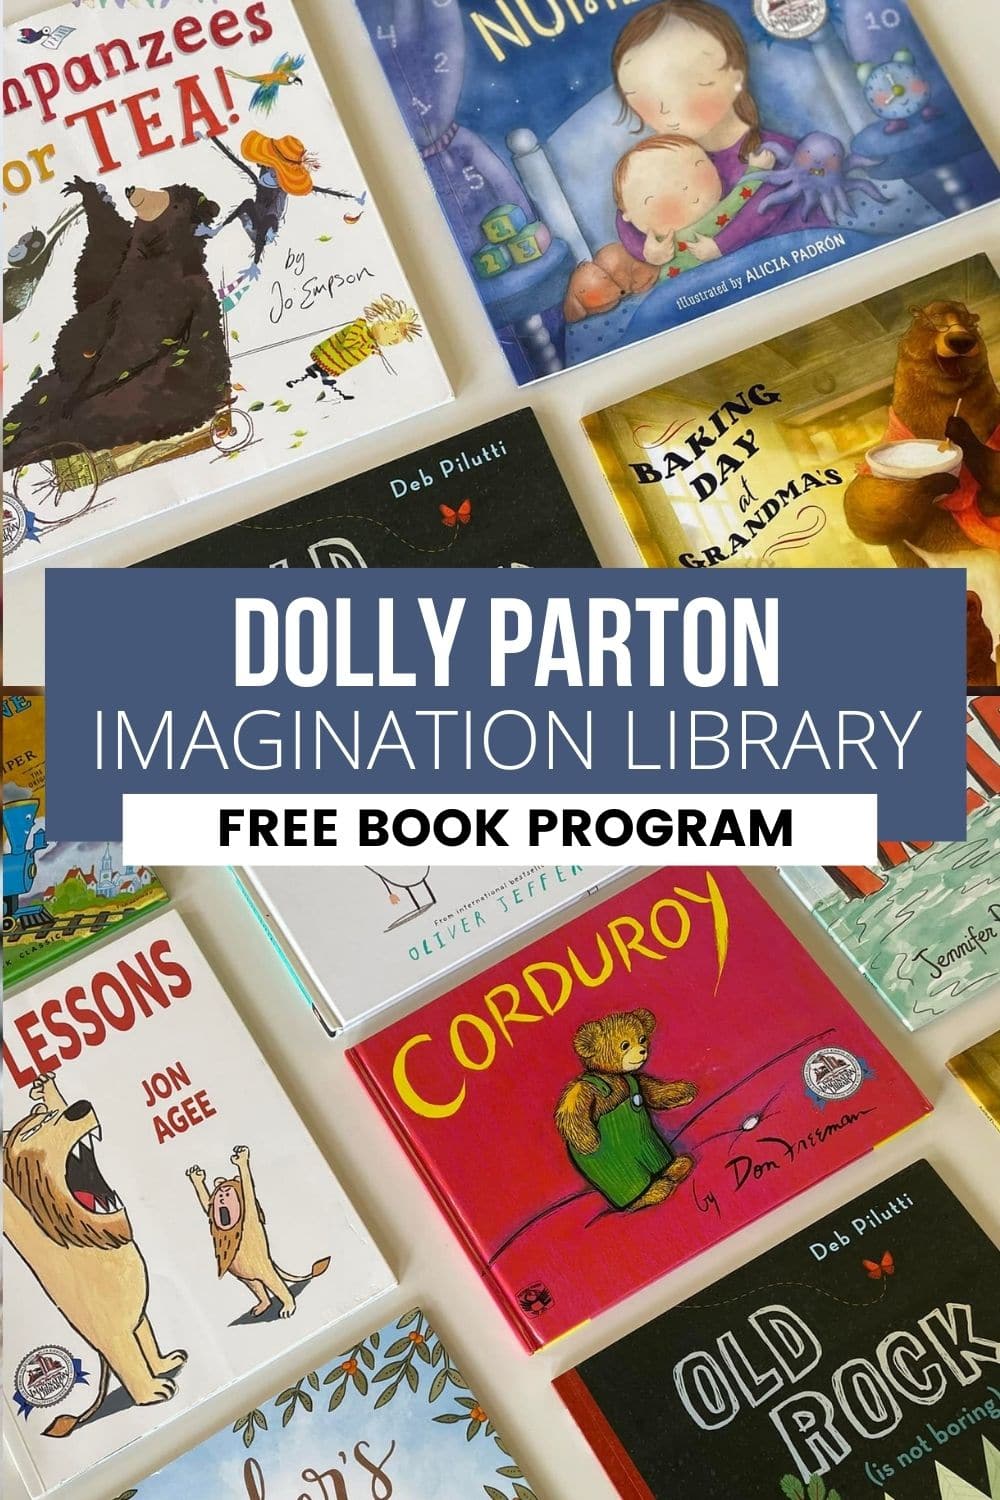 collage of books from Dolly Parton imagination library book club